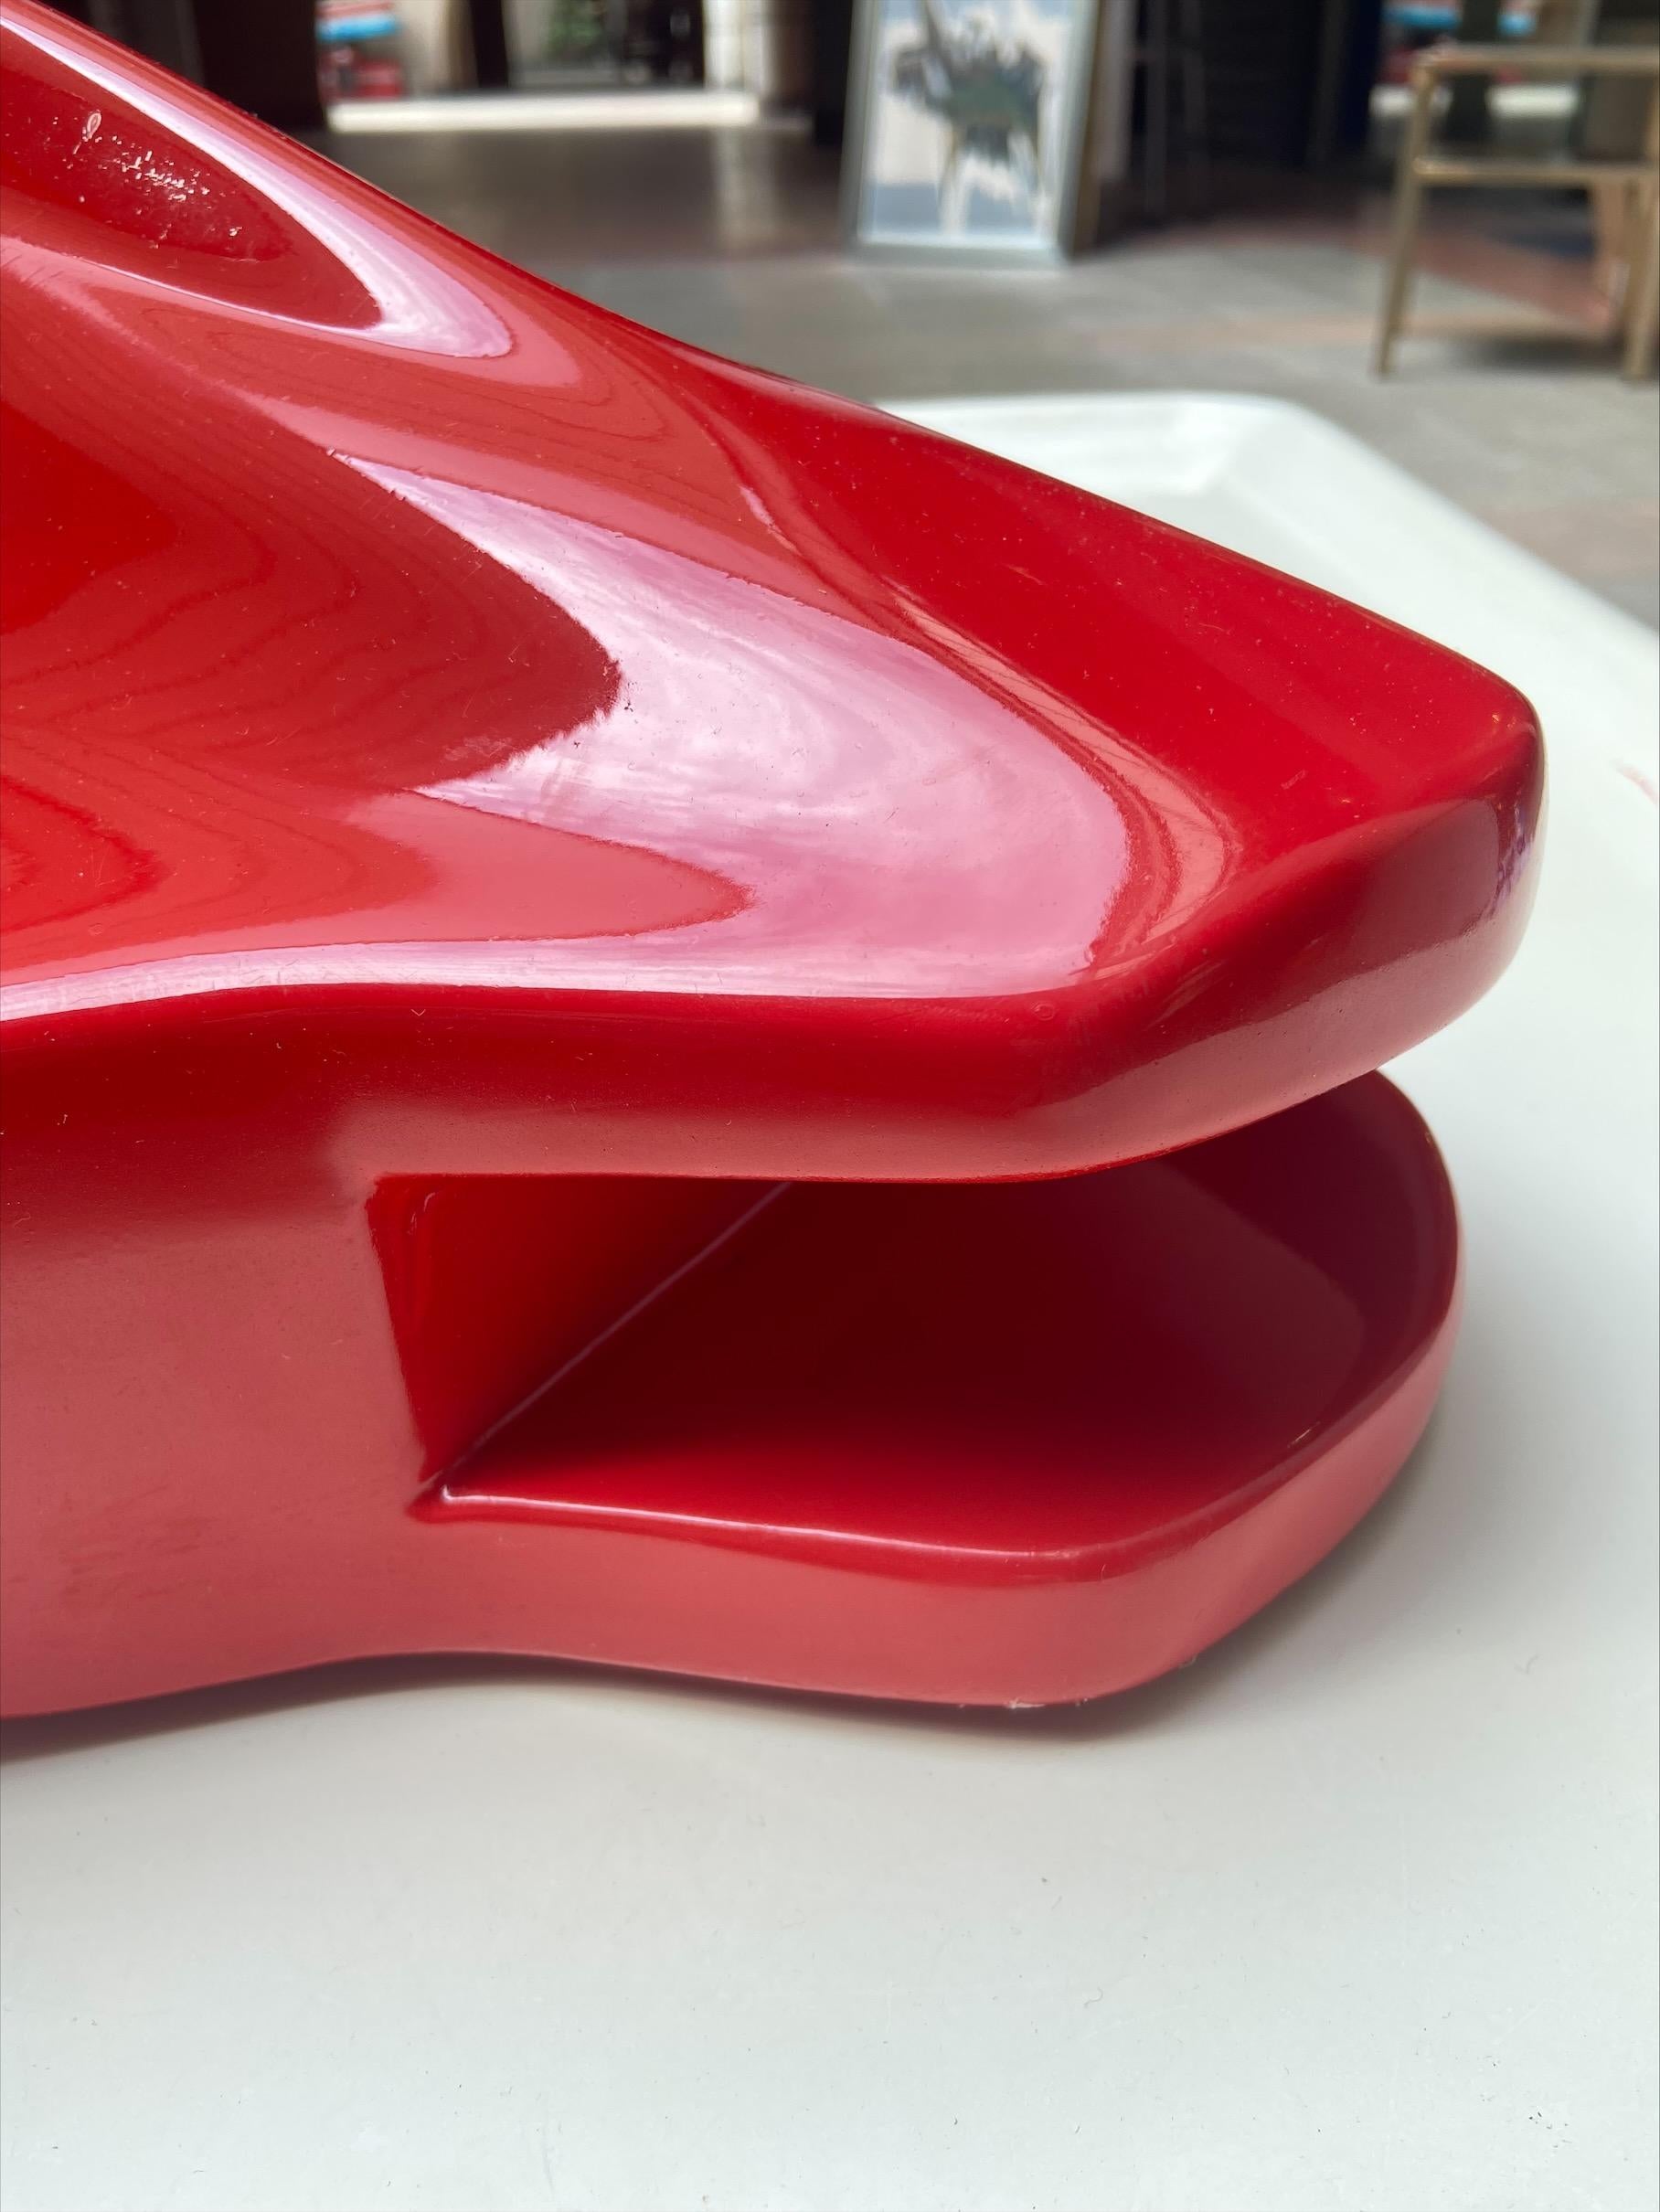 Late 20th Century Red Bird, André Ferrand, Car Sculpture in Red Resin, 1983